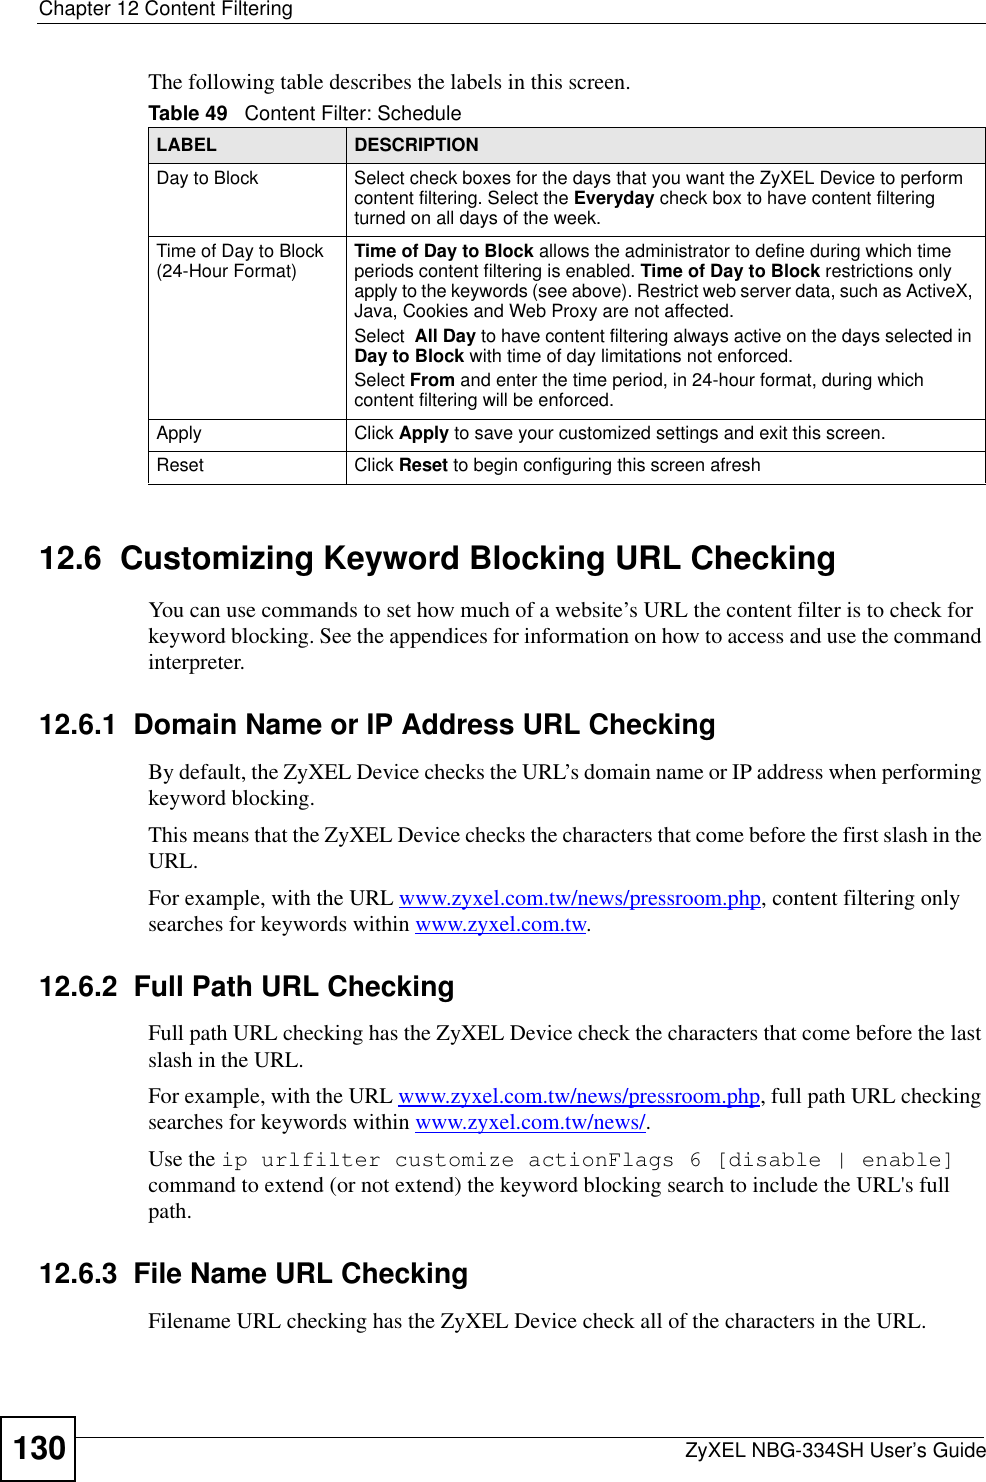 Chapter 12 Content FilteringZyXEL NBG-334SH User’s Guide130The following table describes the labels in this screen.12.6  Customizing Keyword Blocking URL CheckingYou can use commands to set how much of a website’s URL the content filter is to check for keyword blocking. See the appendices for information on how to access and use the command interpreter.12.6.1  Domain Name or IP Address URL CheckingBy default, the ZyXEL Device checks the URL’s domain name or IP address when performing keyword blocking.This means that the ZyXEL Device checks the characters that come before the first slash in the URL.For example, with the URL www.zyxel.com.tw/news/pressroom.php, content filtering only searches for keywords within www.zyxel.com.tw.12.6.2  Full Path URL CheckingFull path URL checking has the ZyXEL Device check the characters that come before the last slash in the URL.For example, with the URL www.zyxel.com.tw/news/pressroom.php, full path URL checking searches for keywords within www.zyxel.com.tw/news/.Use the ip urlfilter customize actionFlags 6 [disable | enable]command to extend (or not extend) the keyword blocking search to include the URL&apos;s full path.12.6.3  File Name URL CheckingFilename URL checking has the ZyXEL Device check all of the characters in the URL.Table 49   Content Filter: ScheduleLABEL DESCRIPTIONDay to Block Select check boxes for the days that you want the ZyXEL Device to perform content filtering. Select the Everyday check box to have content filtering turned on all days of the week.Time of Day to Block (24-Hour Format) Time of Day to Block allows the administrator to define during which time periods content filtering is enabled. Time of Day to Block restrictions only apply to the keywords (see above). Restrict web server data, such as ActiveX, Java, Cookies and Web Proxy are not affected.Select All Day to have content filtering always active on the days selected in Day to Block with time of day limitations not enforced.Select From and enter the time period, in 24-hour format, during which content filtering will be enforced. Apply Click Apply to save your customized settings and exit this screen.Reset Click Reset to begin configuring this screen afresh